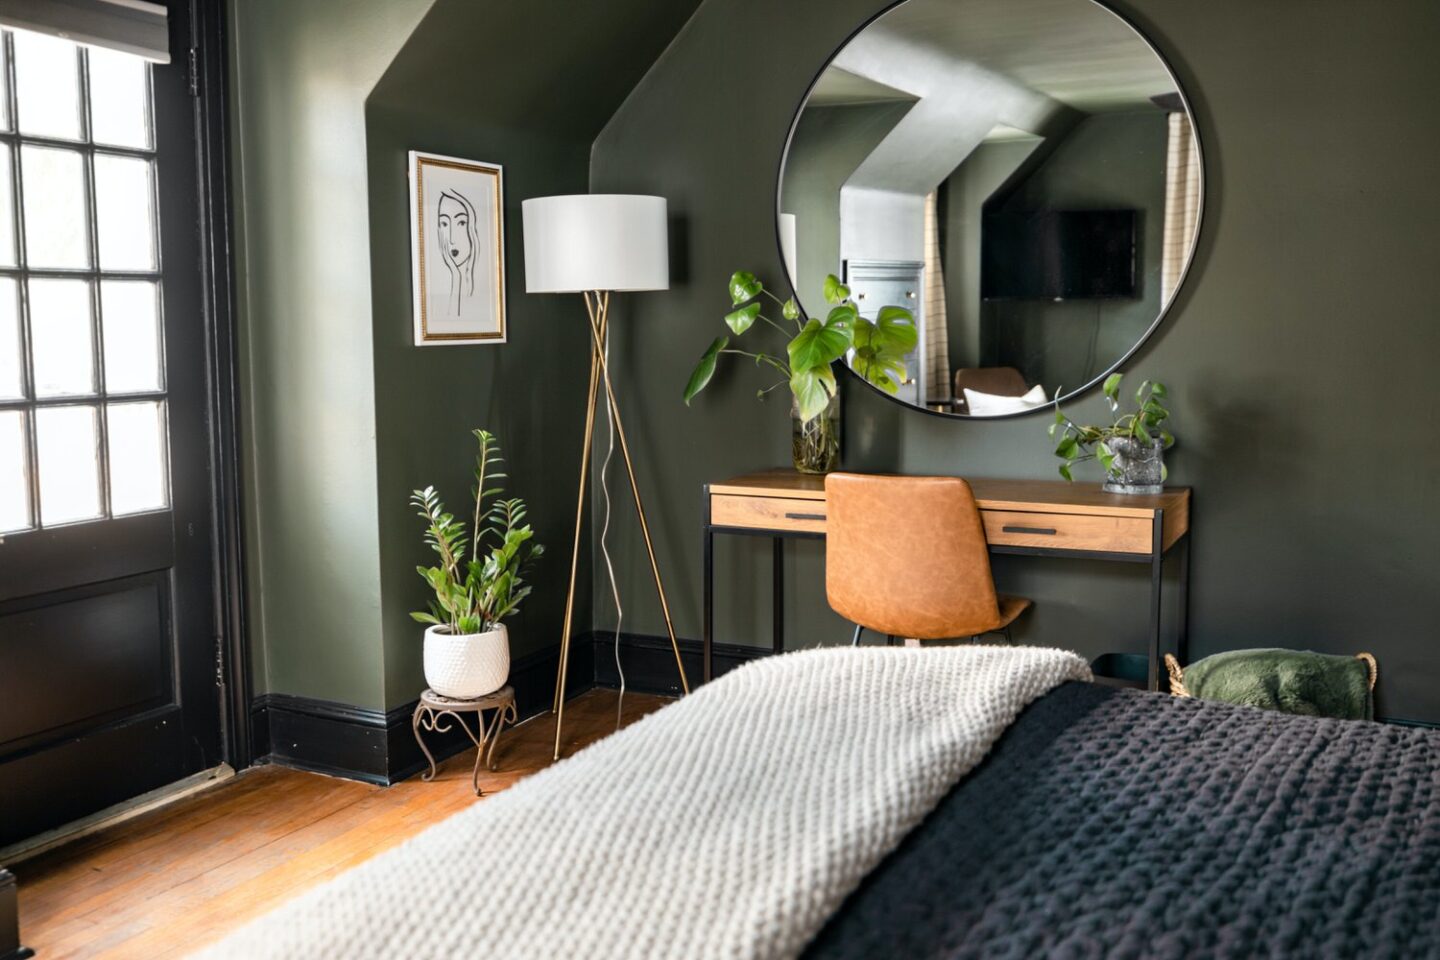 Searching For Rental Apartments? 8 Ways To Find Cozy Space!